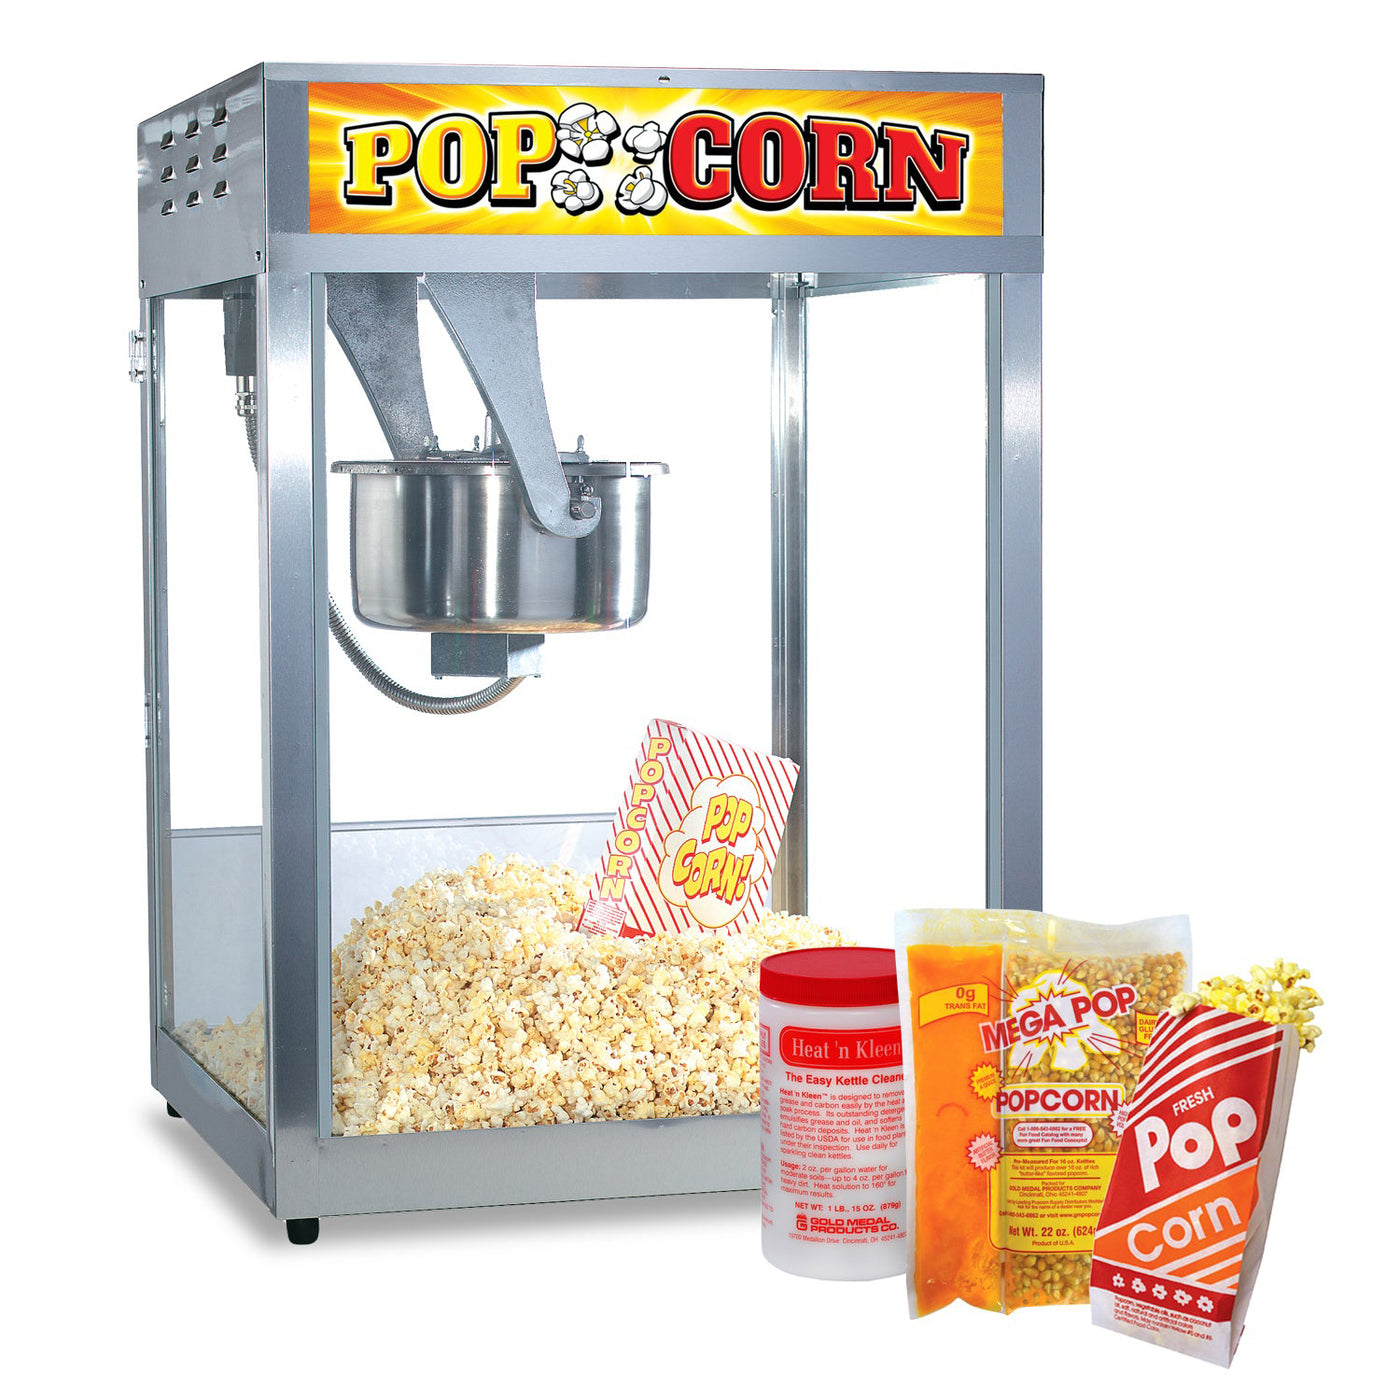 Gold Medal Popcorn Machine Cleaning Instructions